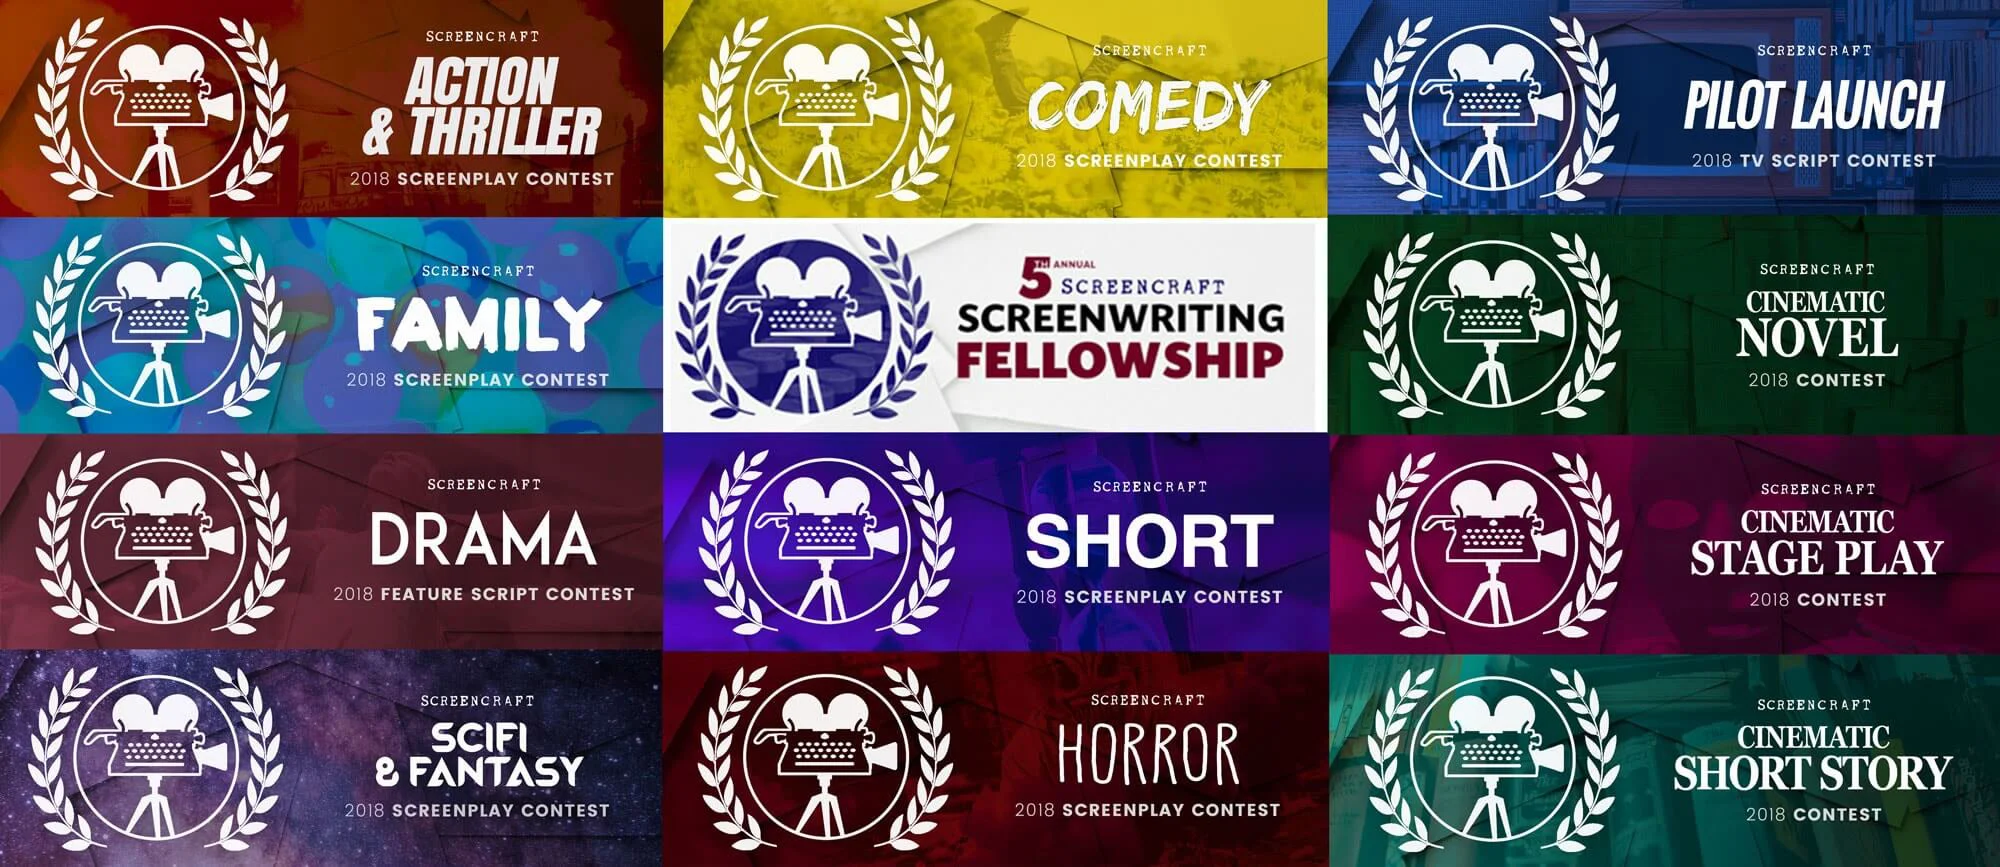 Best Screenwriting Contests - ScreenCraft Screenplay Contest